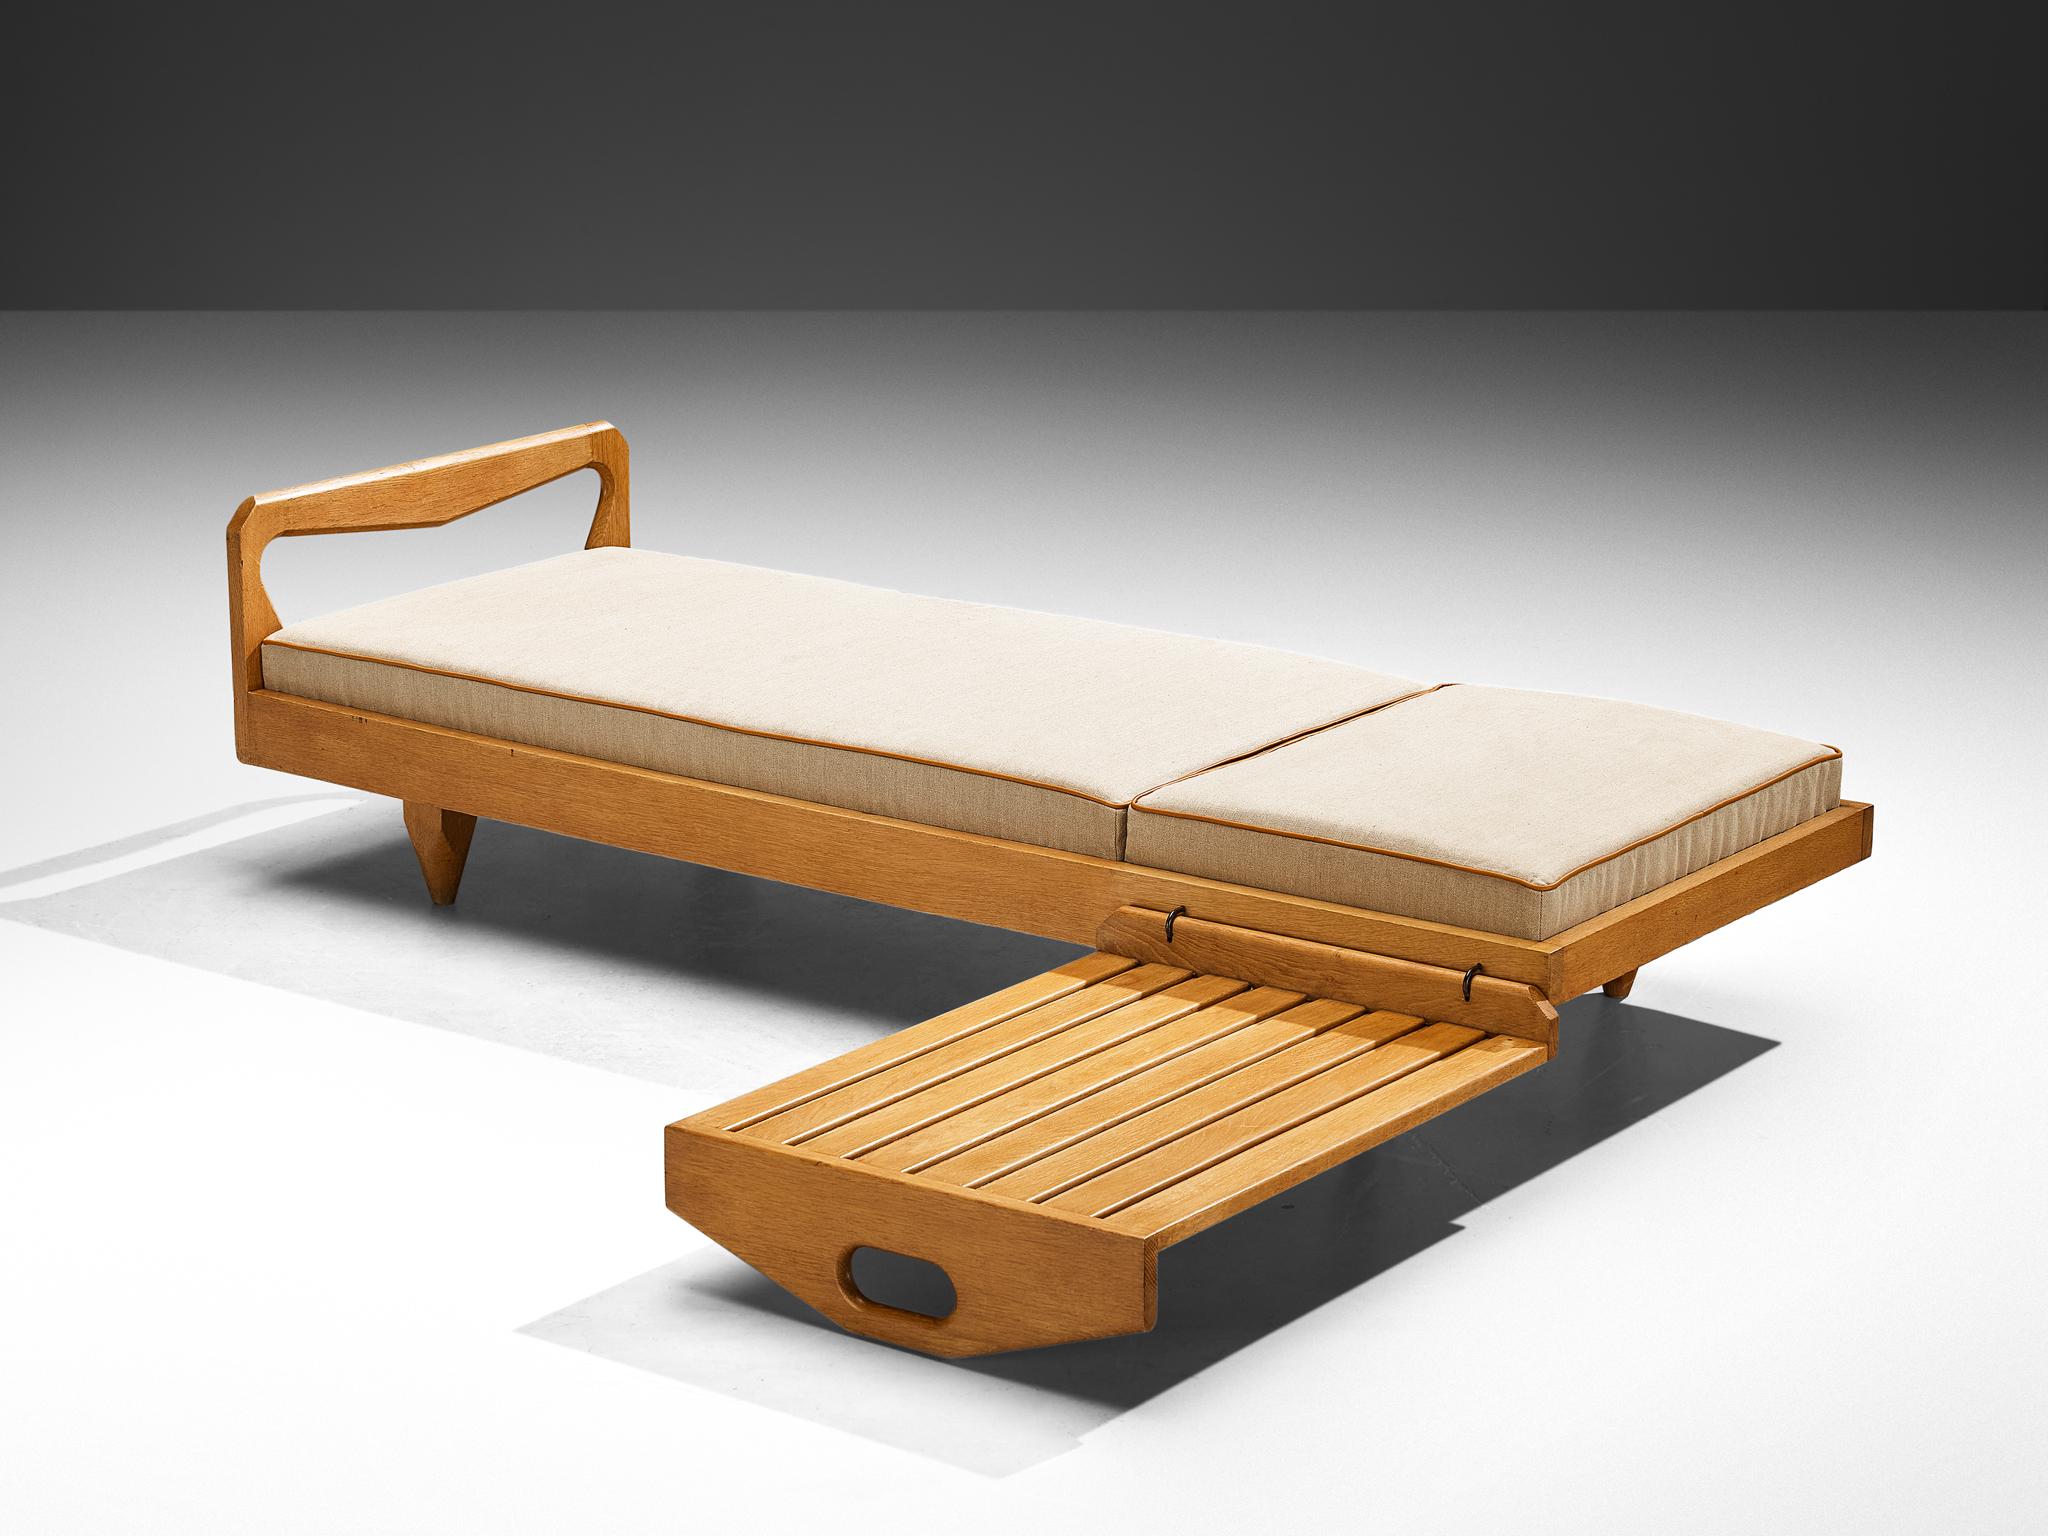 Guillerme et Chambron, daybed bench, oak, fabric, France, 1960s.

This low bench or daybed shows the admirable, characteristic details of the French designer duo Guillerme and Chambron. The bench stands on four triangular legs. The seat is made of